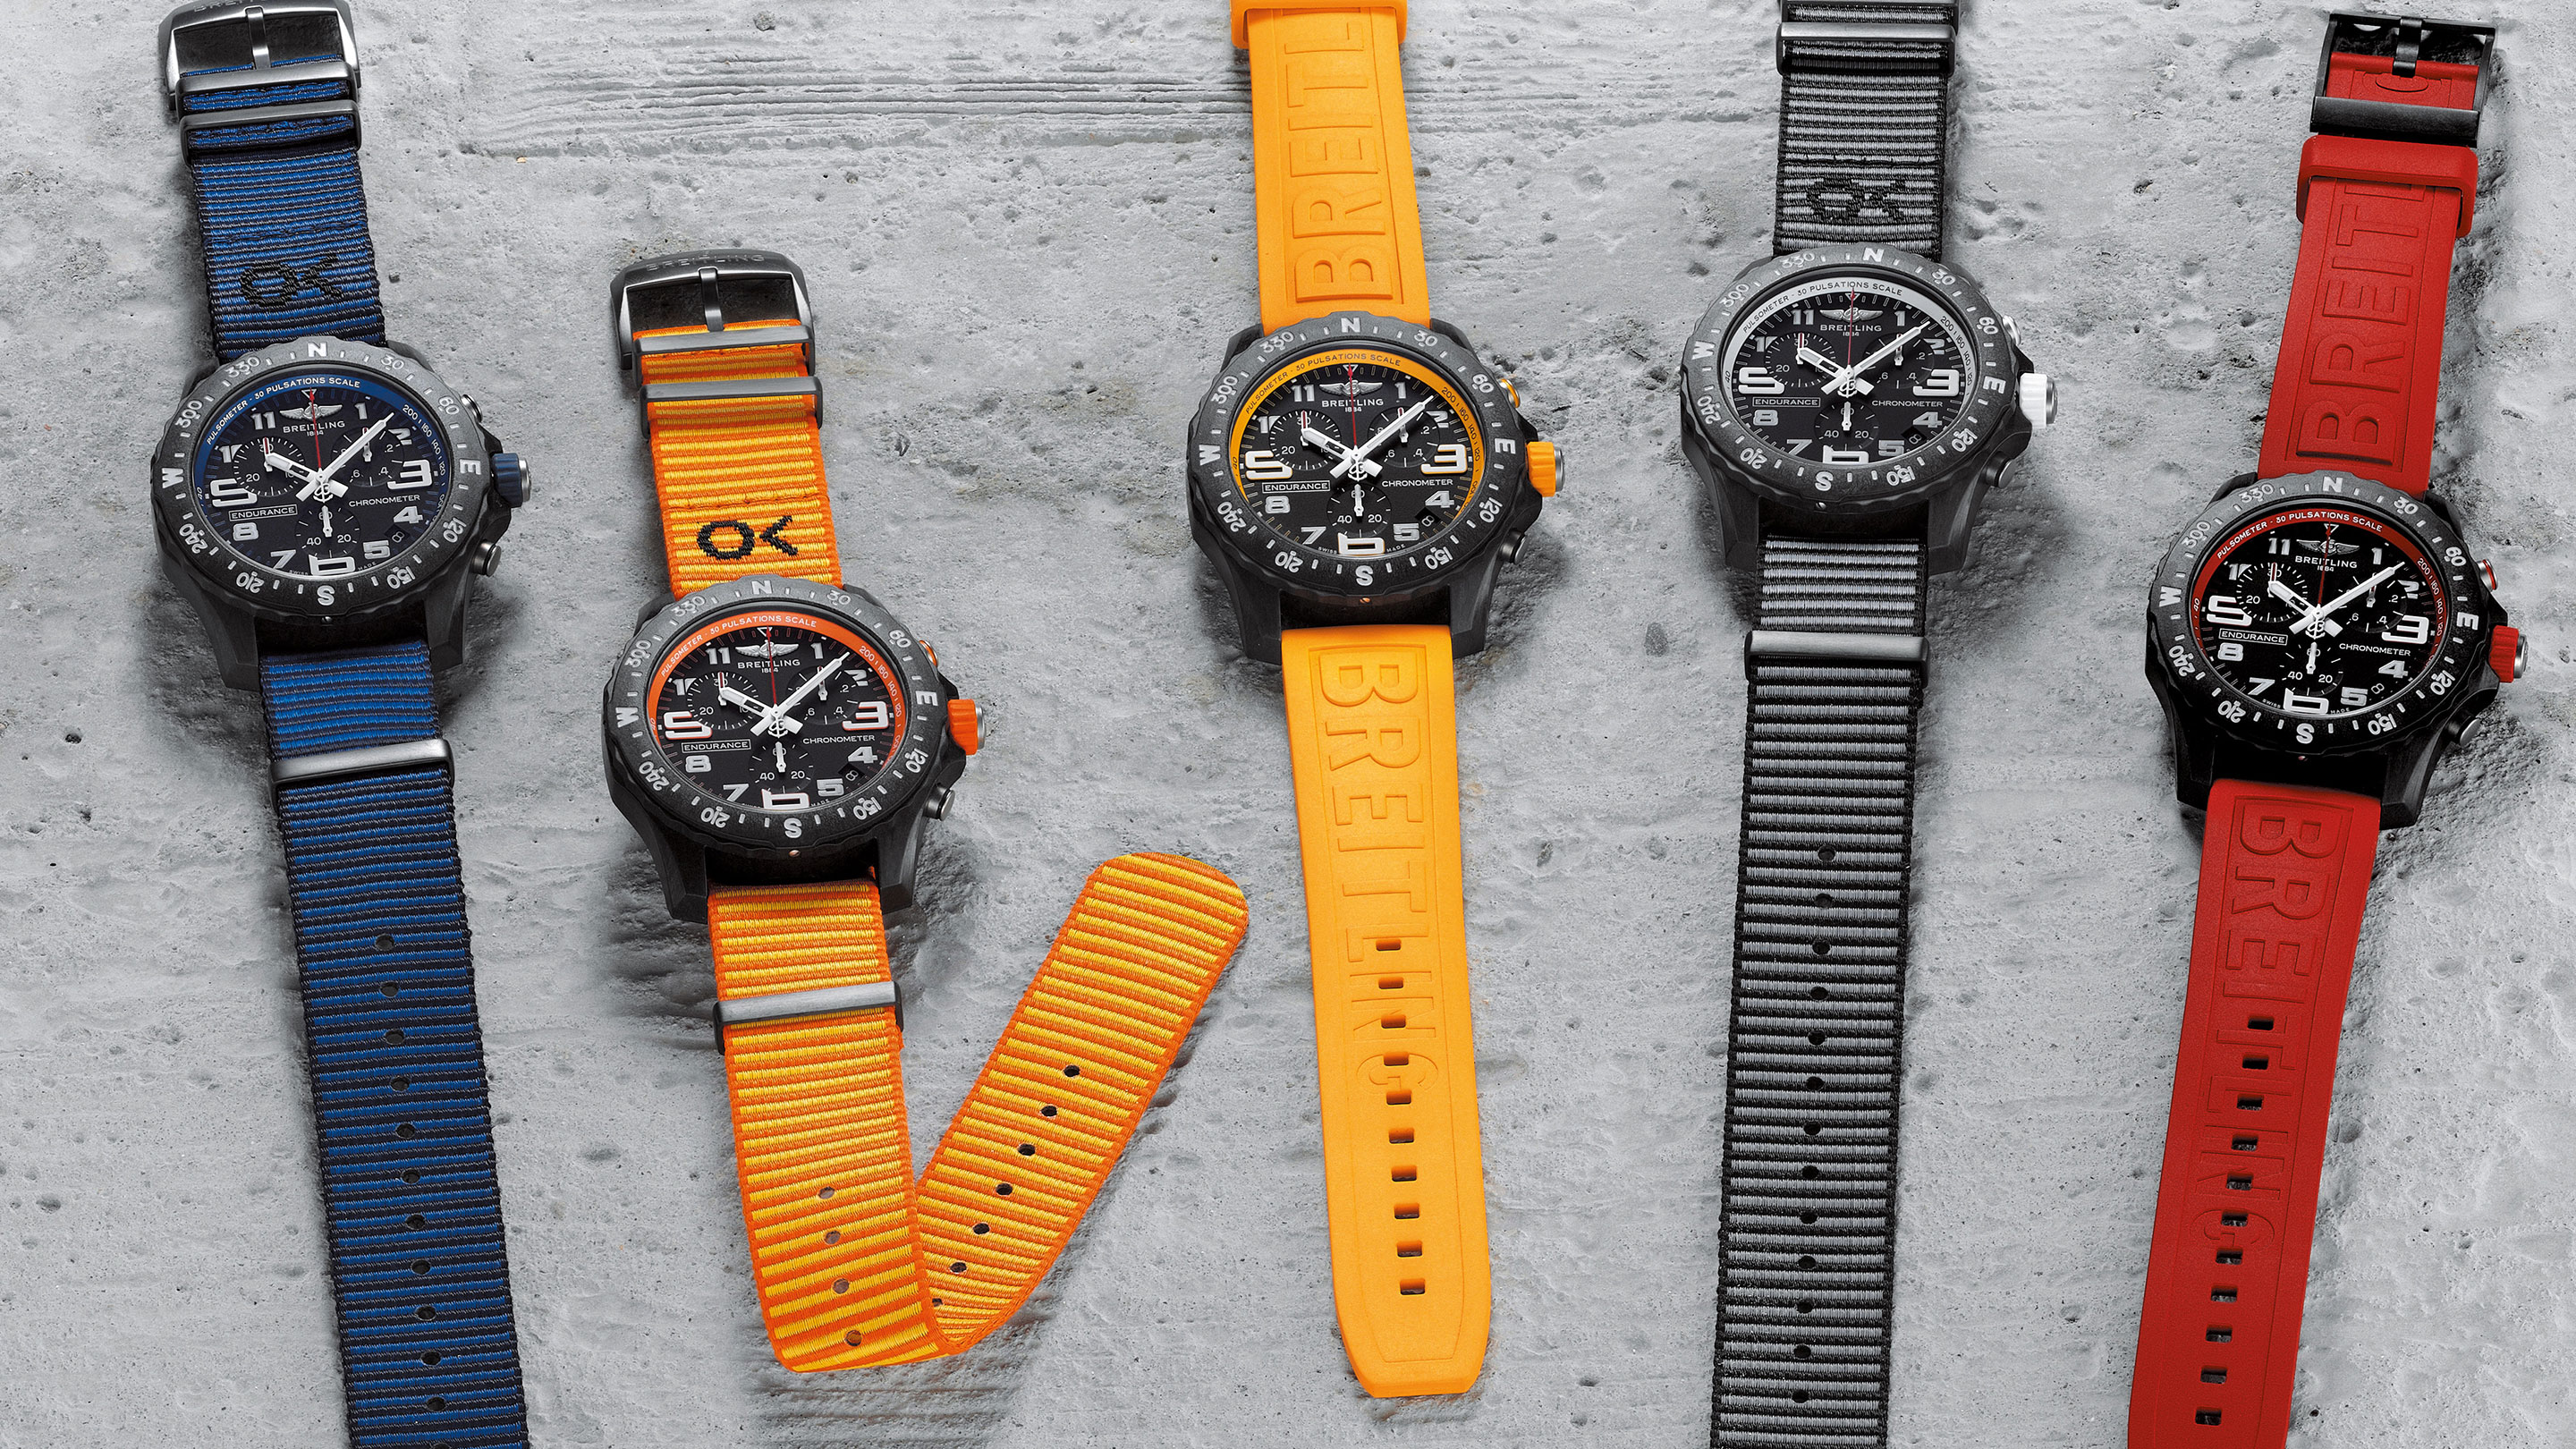 Introducing: The Breitling Endurance Pro - Hodinkee